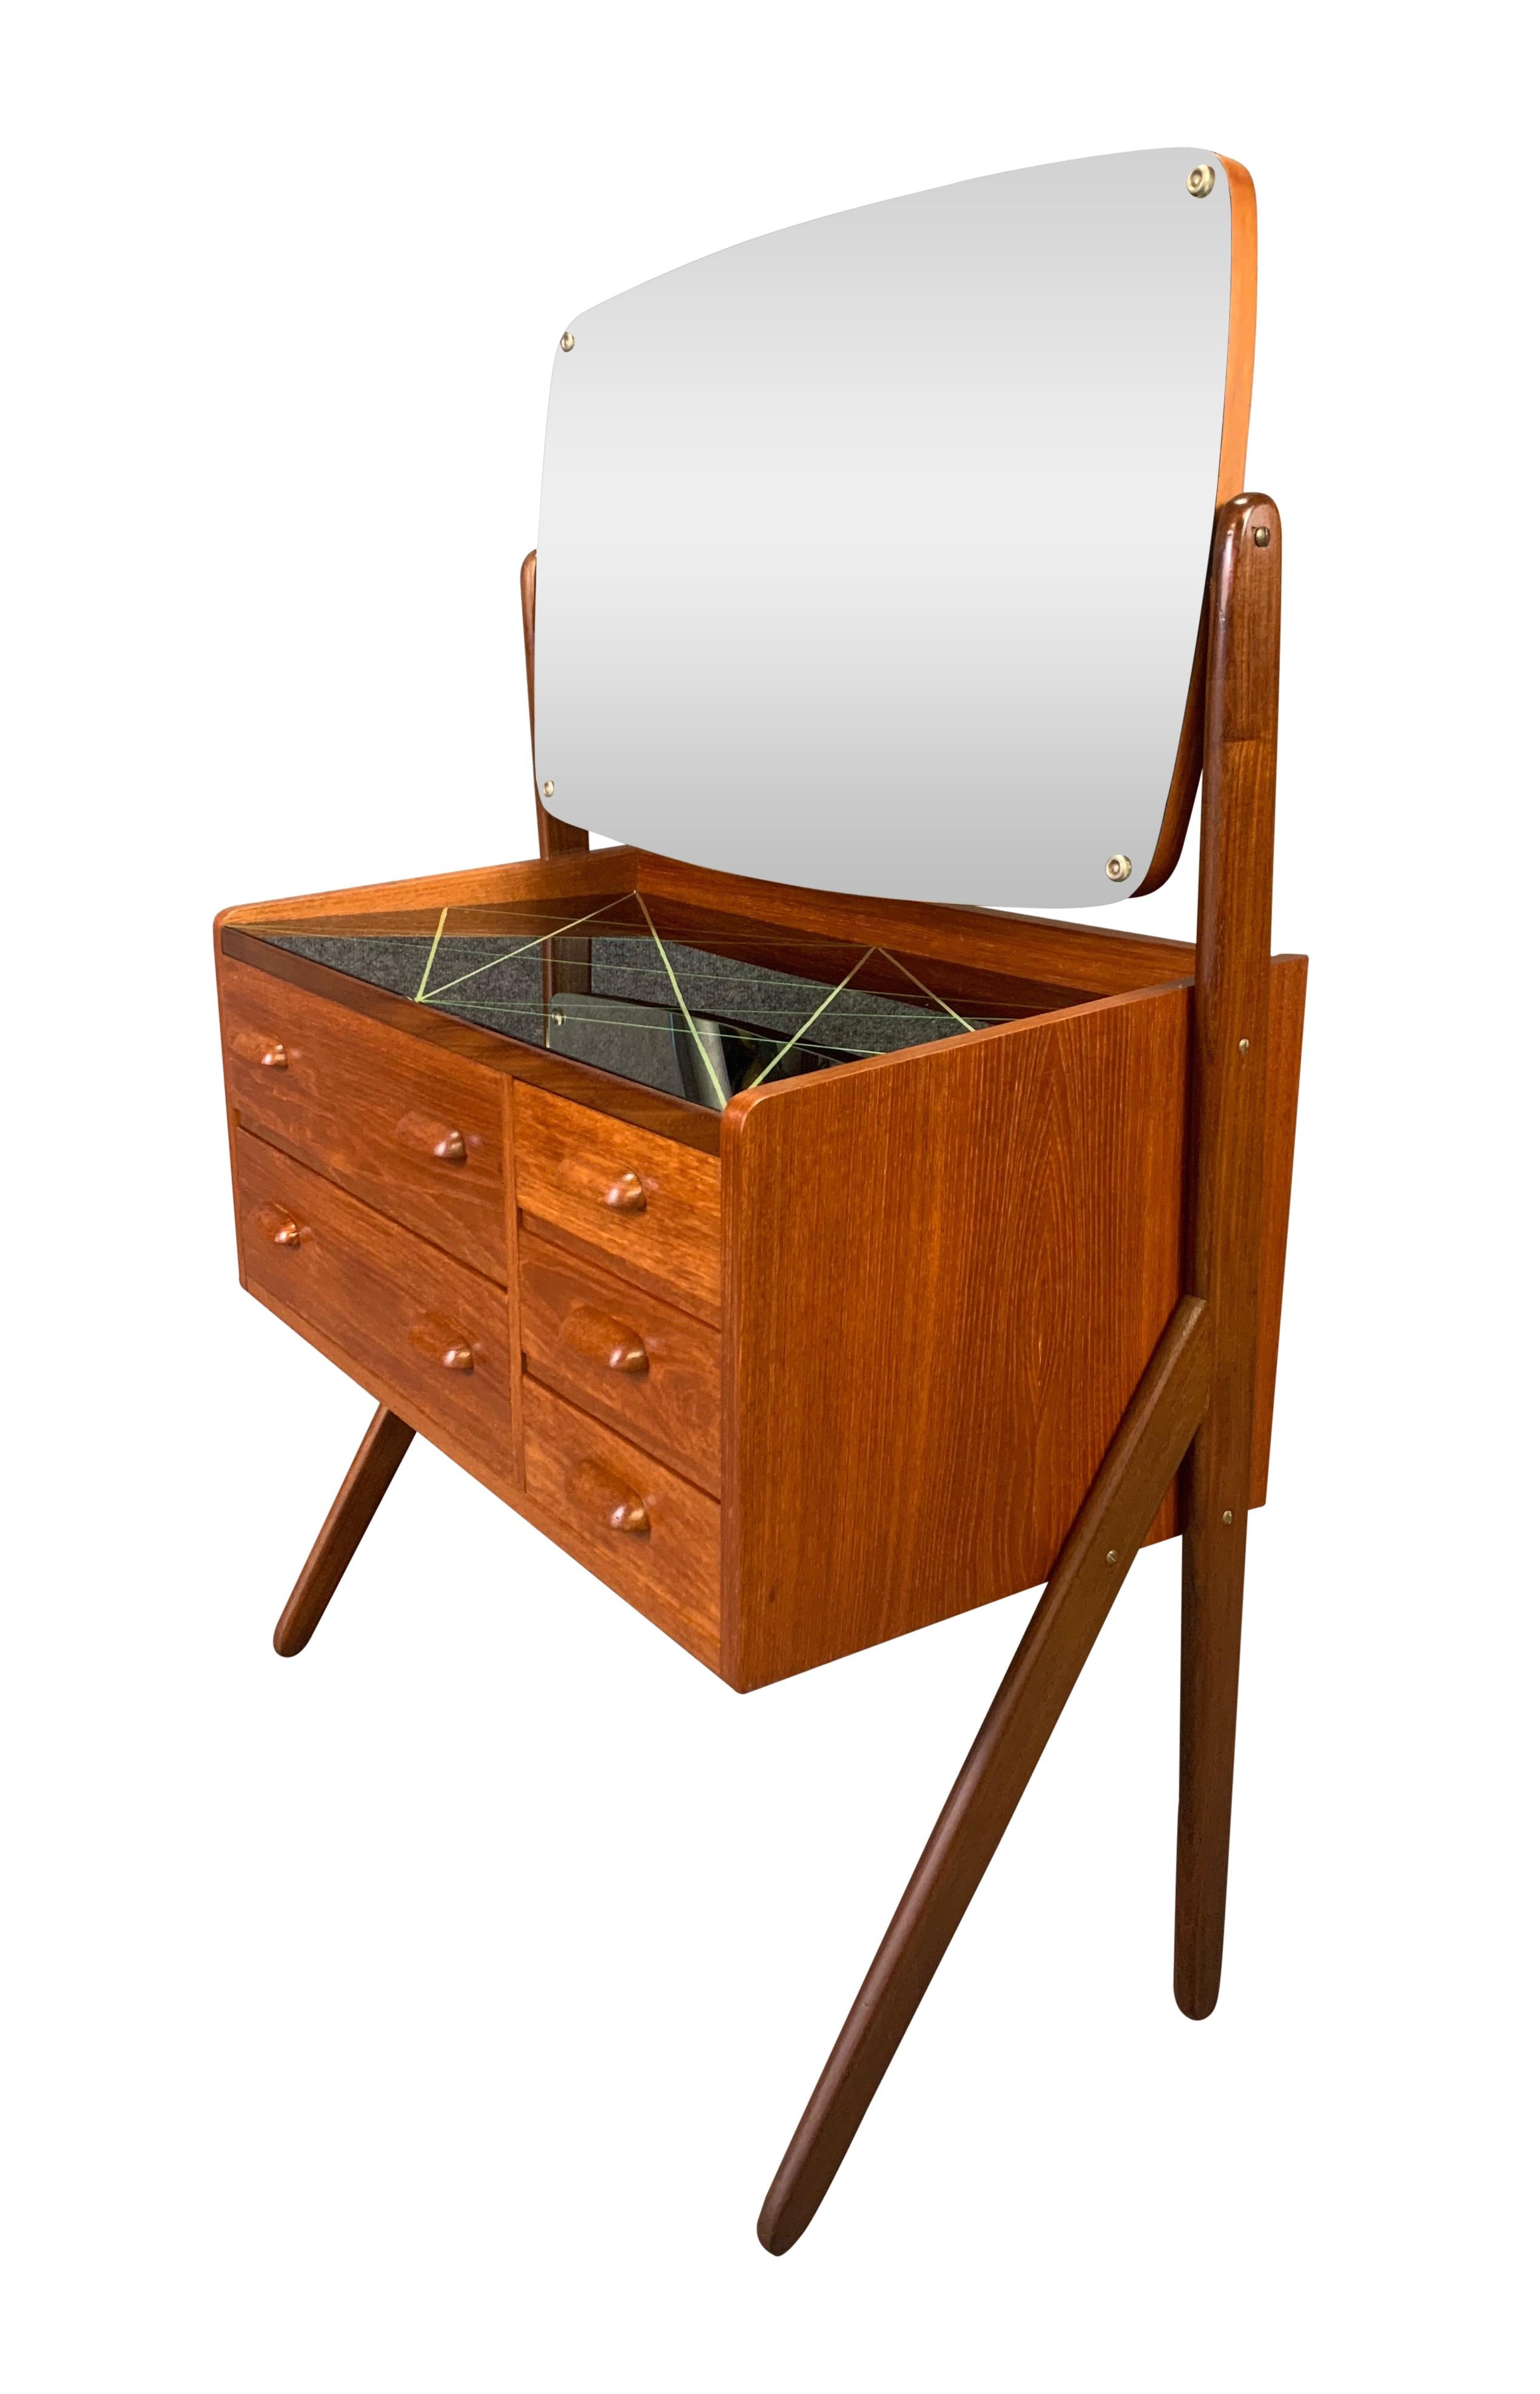 Here is a beautiful Scandinavian Modern dressing table in teak designed by Sigfred Omann and manufactured by Ølholm Møbelfabrik
in Denmark in the 1960s.
This lovely piece, recently imported from Copenhagen to California before its refinishing,